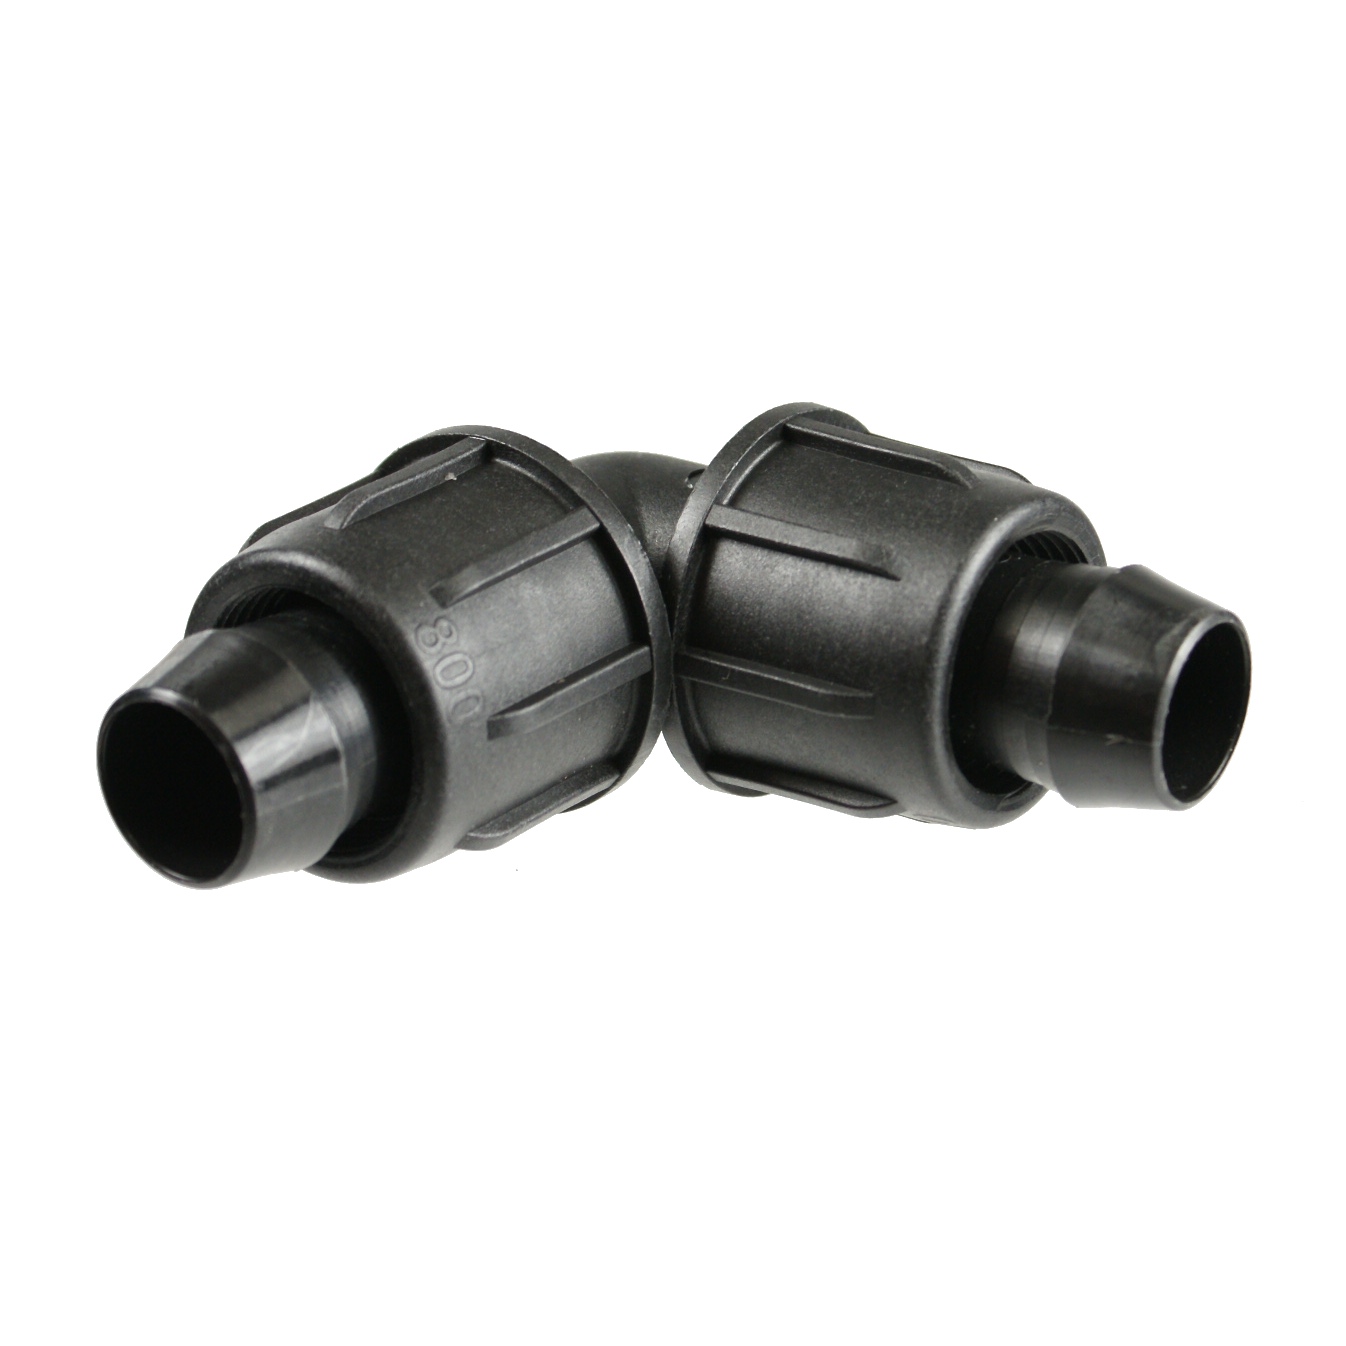 Easy to Install Perma-Loc 1/2 Tubing 3/4 FHT w/ Swivel Irrigation Fitting 5pack 